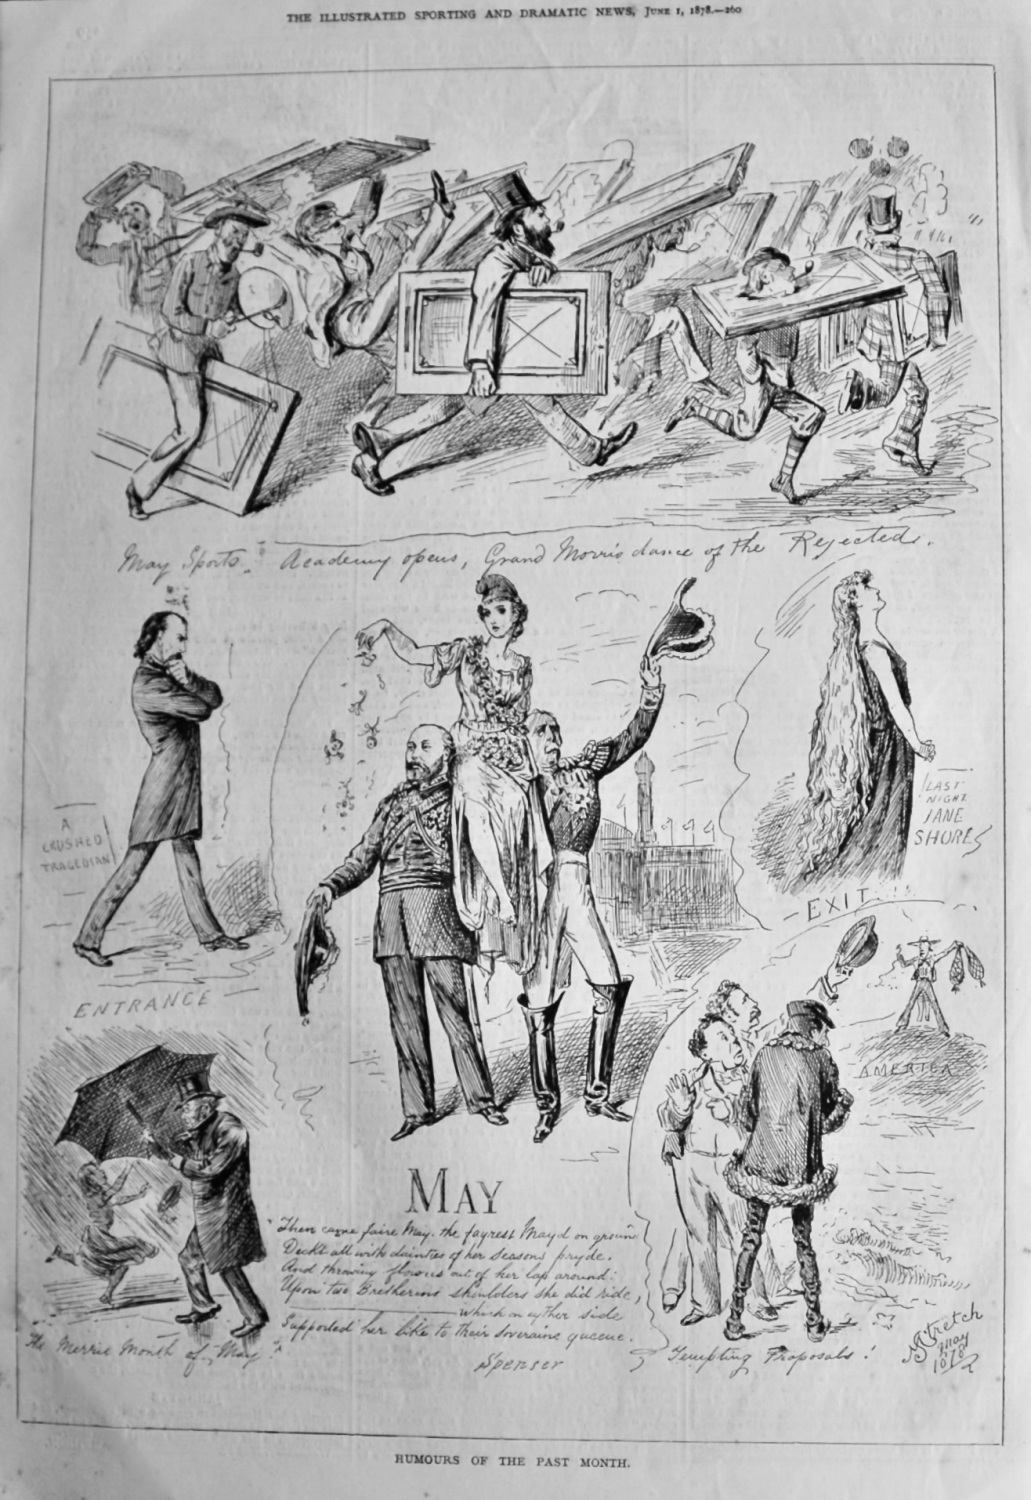 Humours of the Past Month.  May 1878.